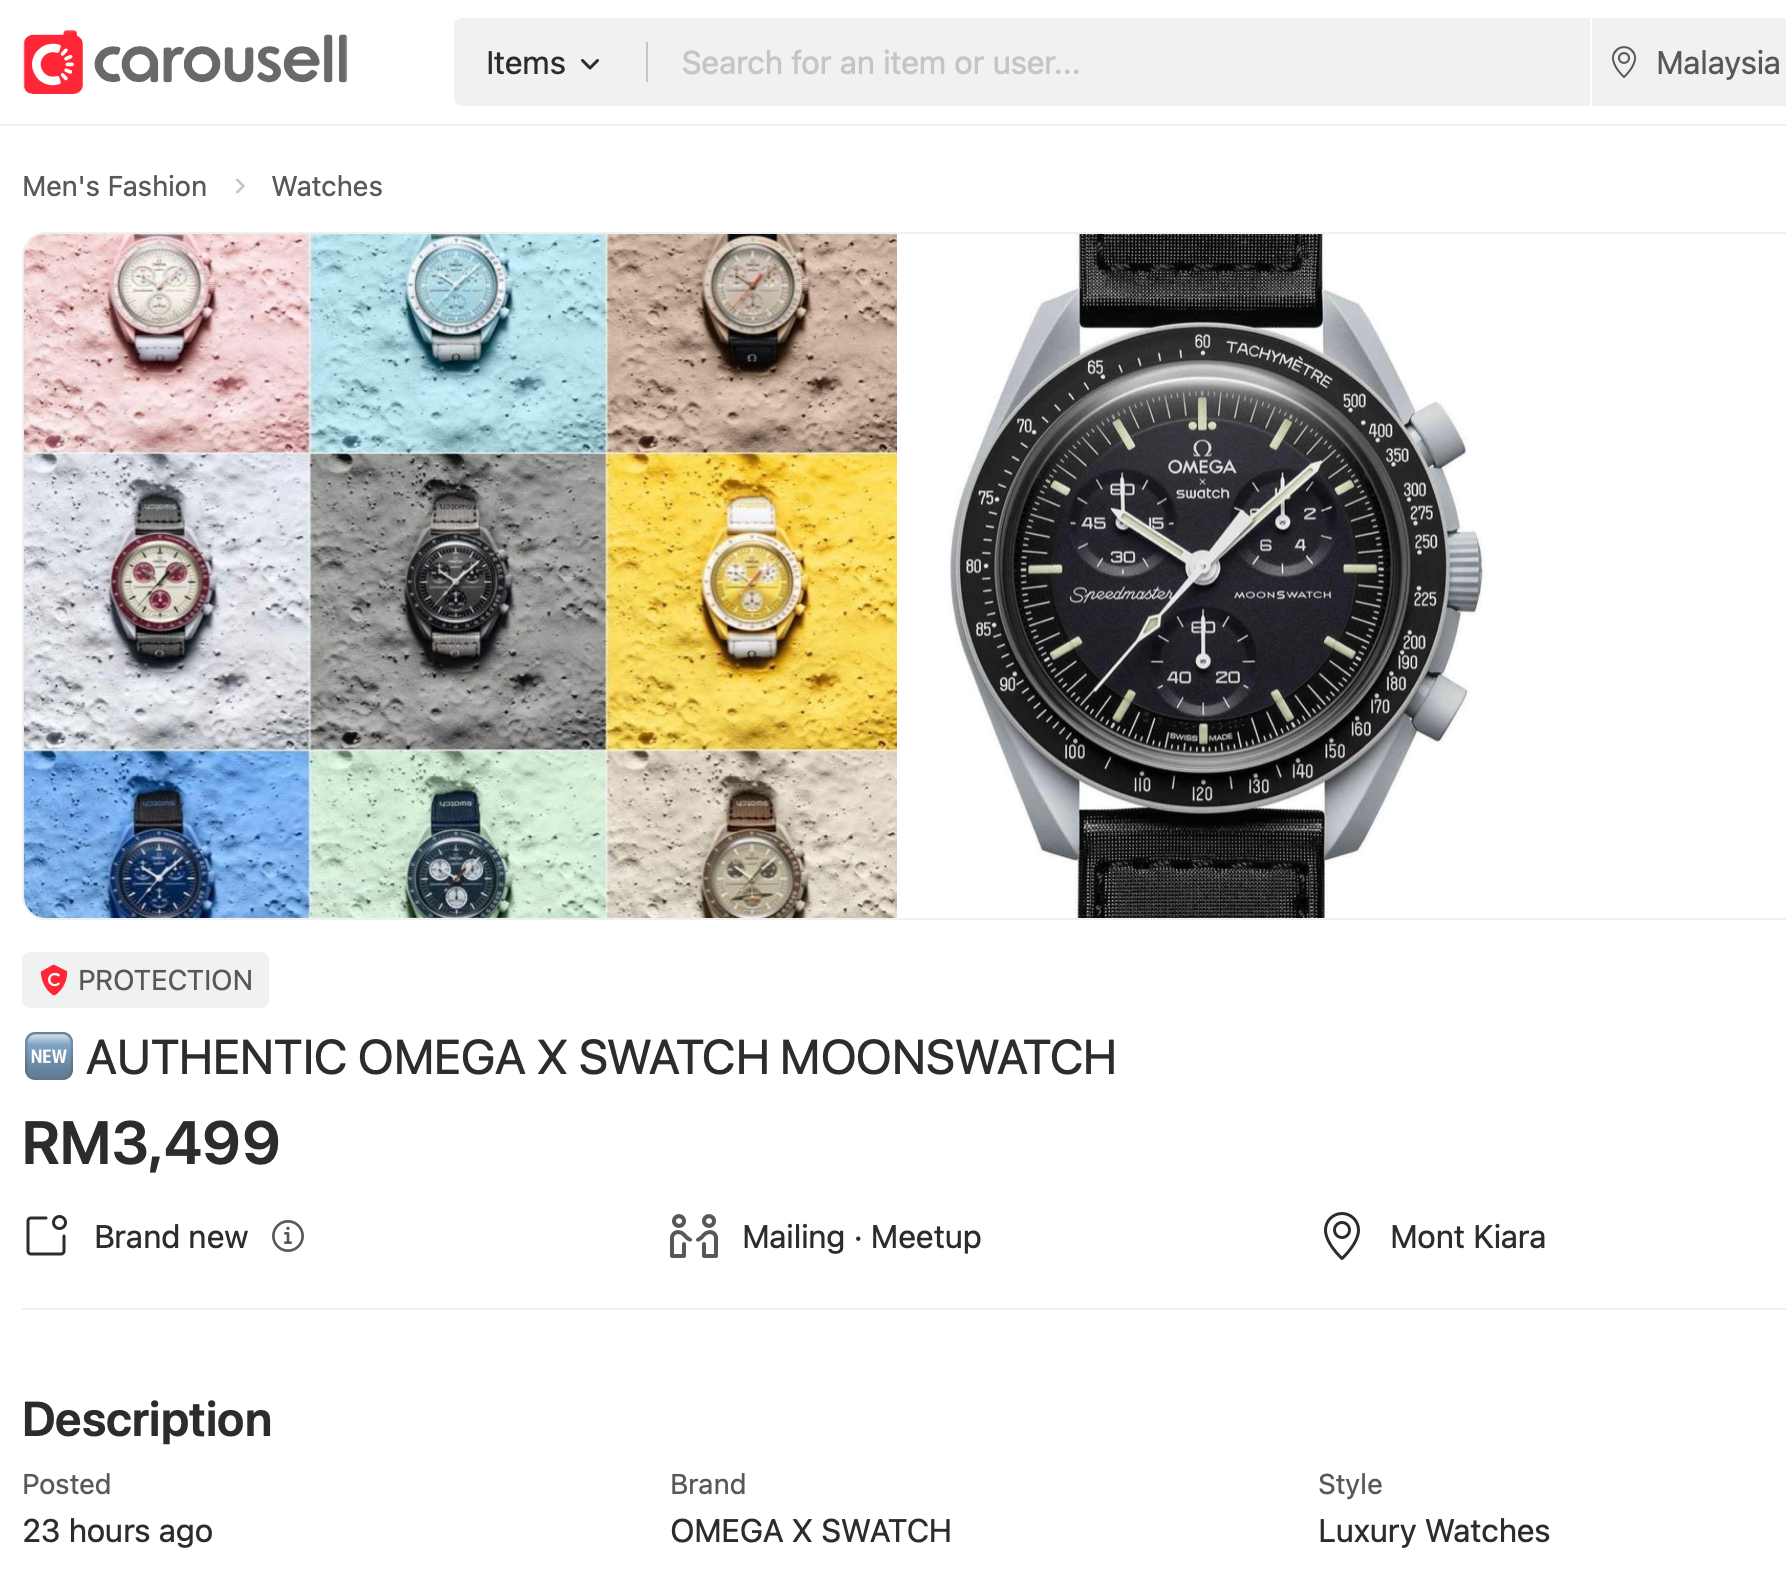 Omega swatch goes on carousell for rm8,000 002